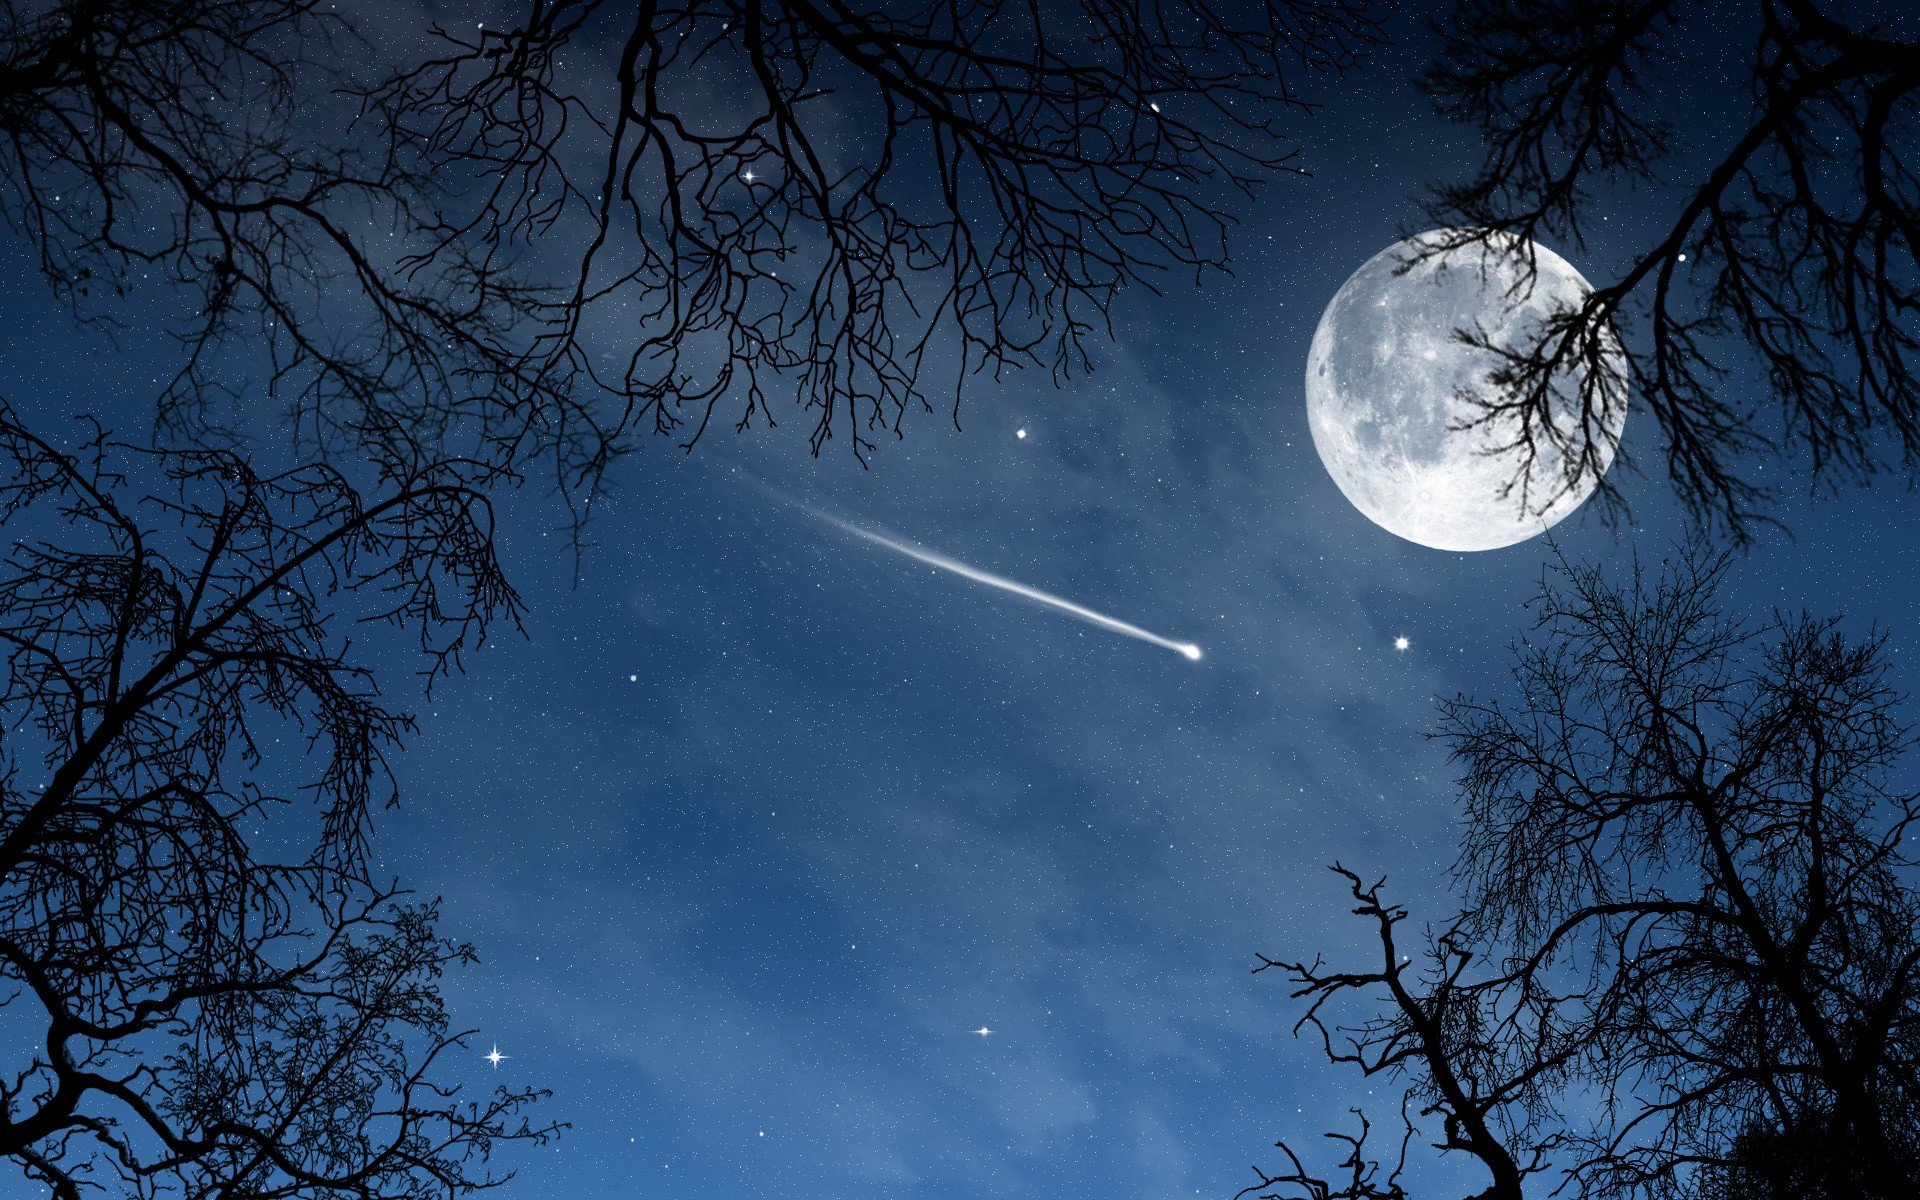 Shooting star, fool moon, tree branches, night wallpaper download. Wallpaper, picture, photo